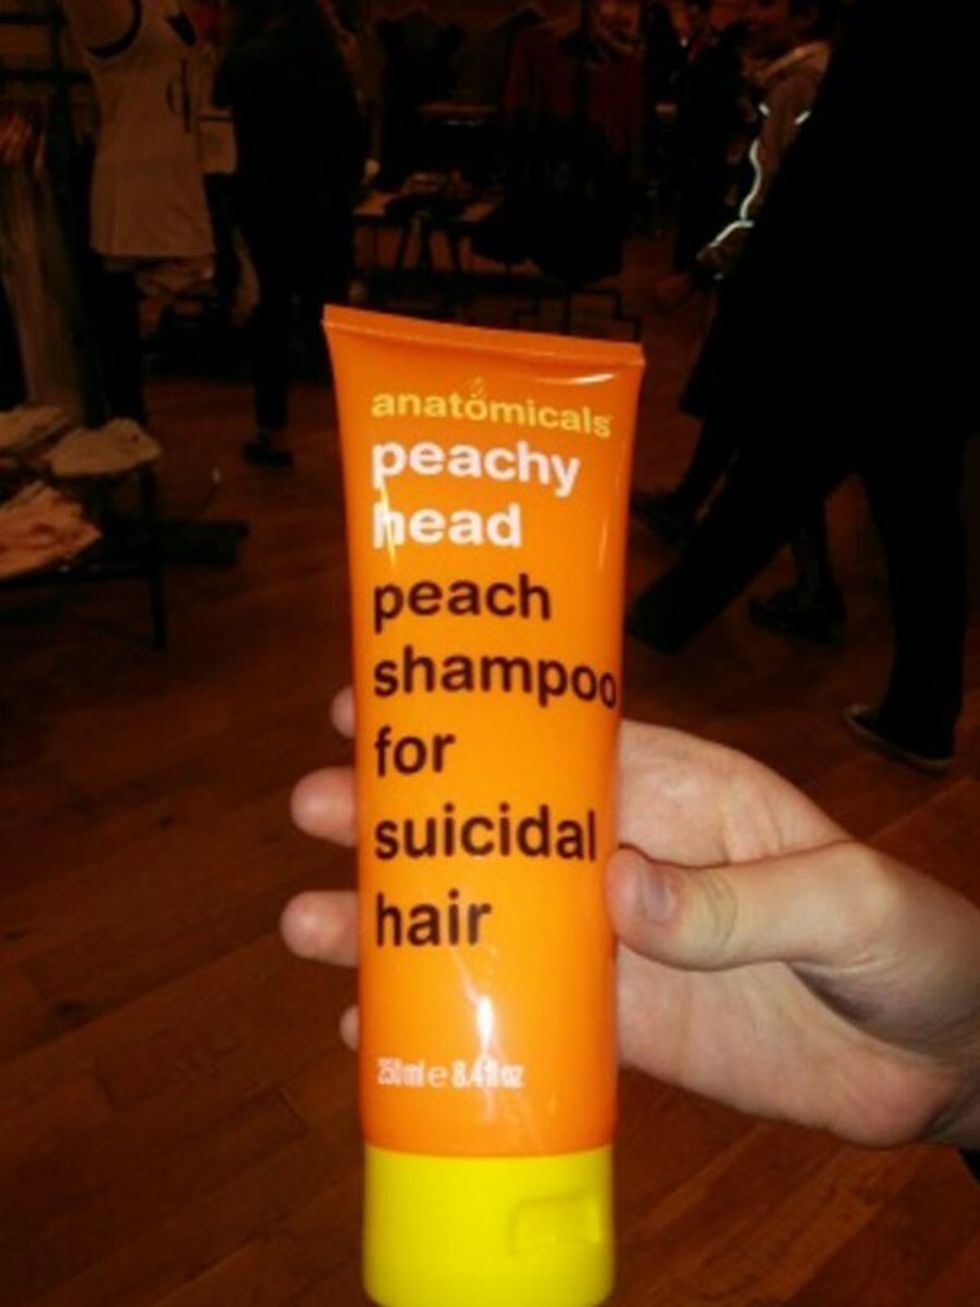 Urban Outfitters Pulls 'Disgusting' Shampoo From Its Shelves After Customers Say it Mocks Suicide